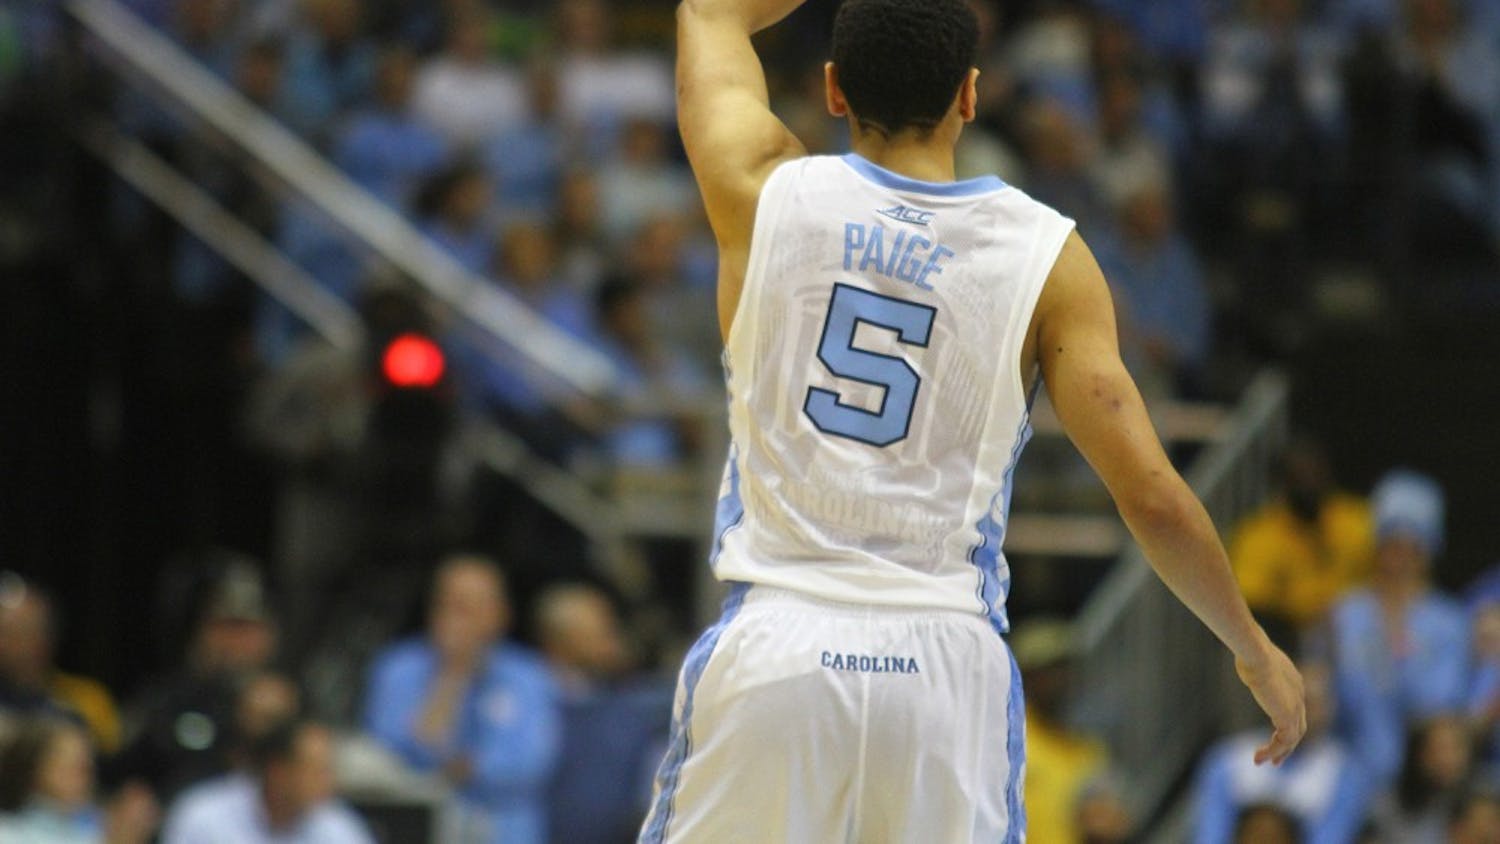 Senior guard Marcus Paige (5) signals to his teammates during last weekend's home game against Pittsburgh. The Tar Heels beat the Panthers 85-54.